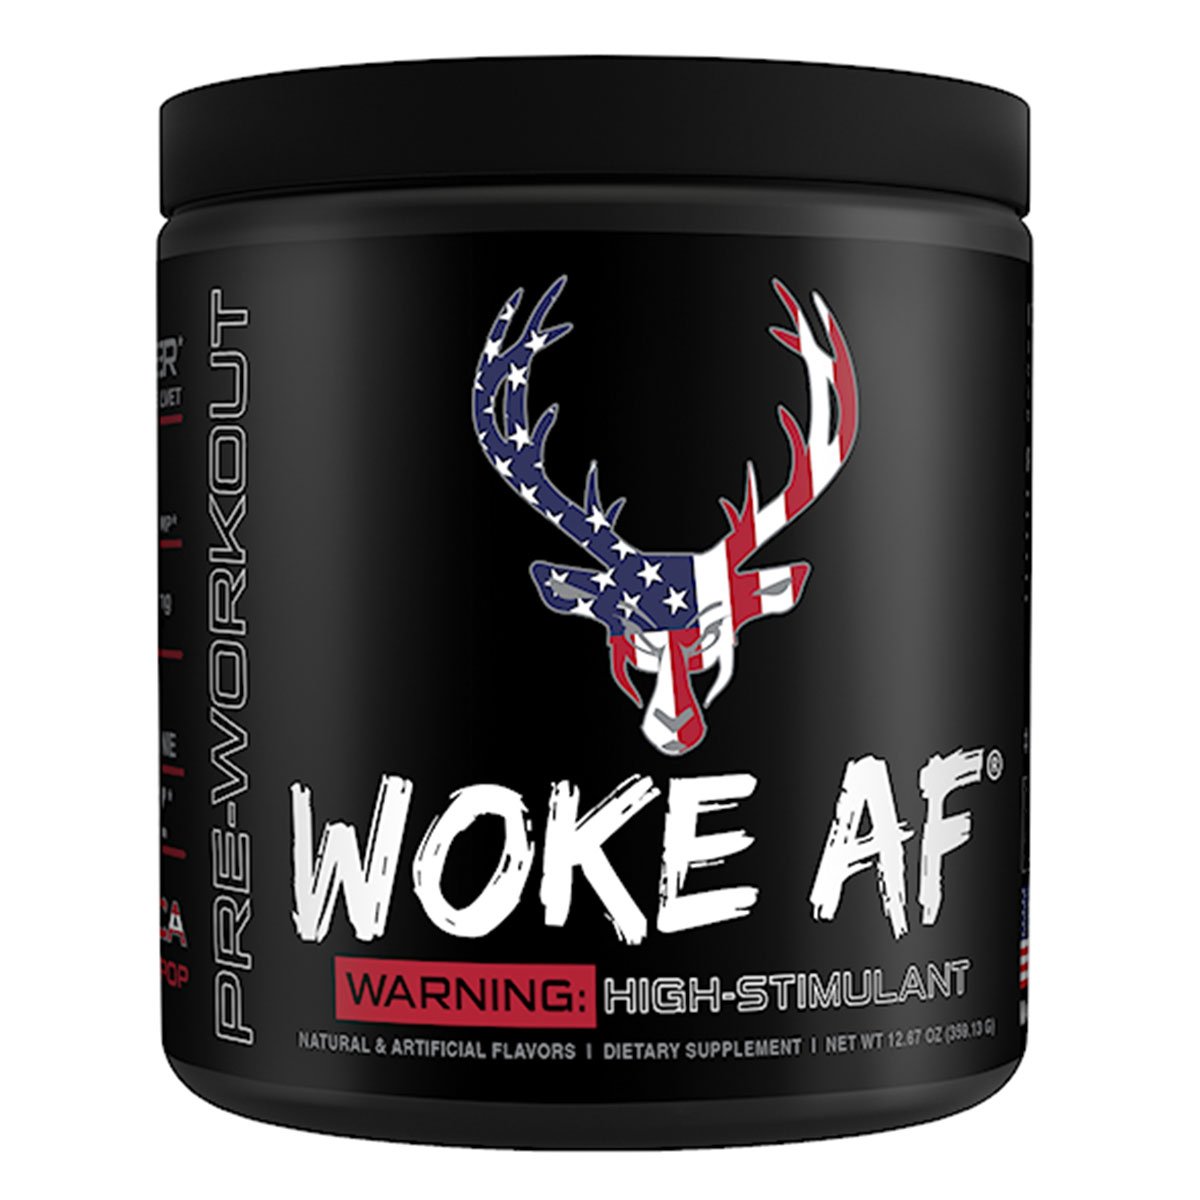 15 Minute Bucked up reviews pre workout for Build Muscle